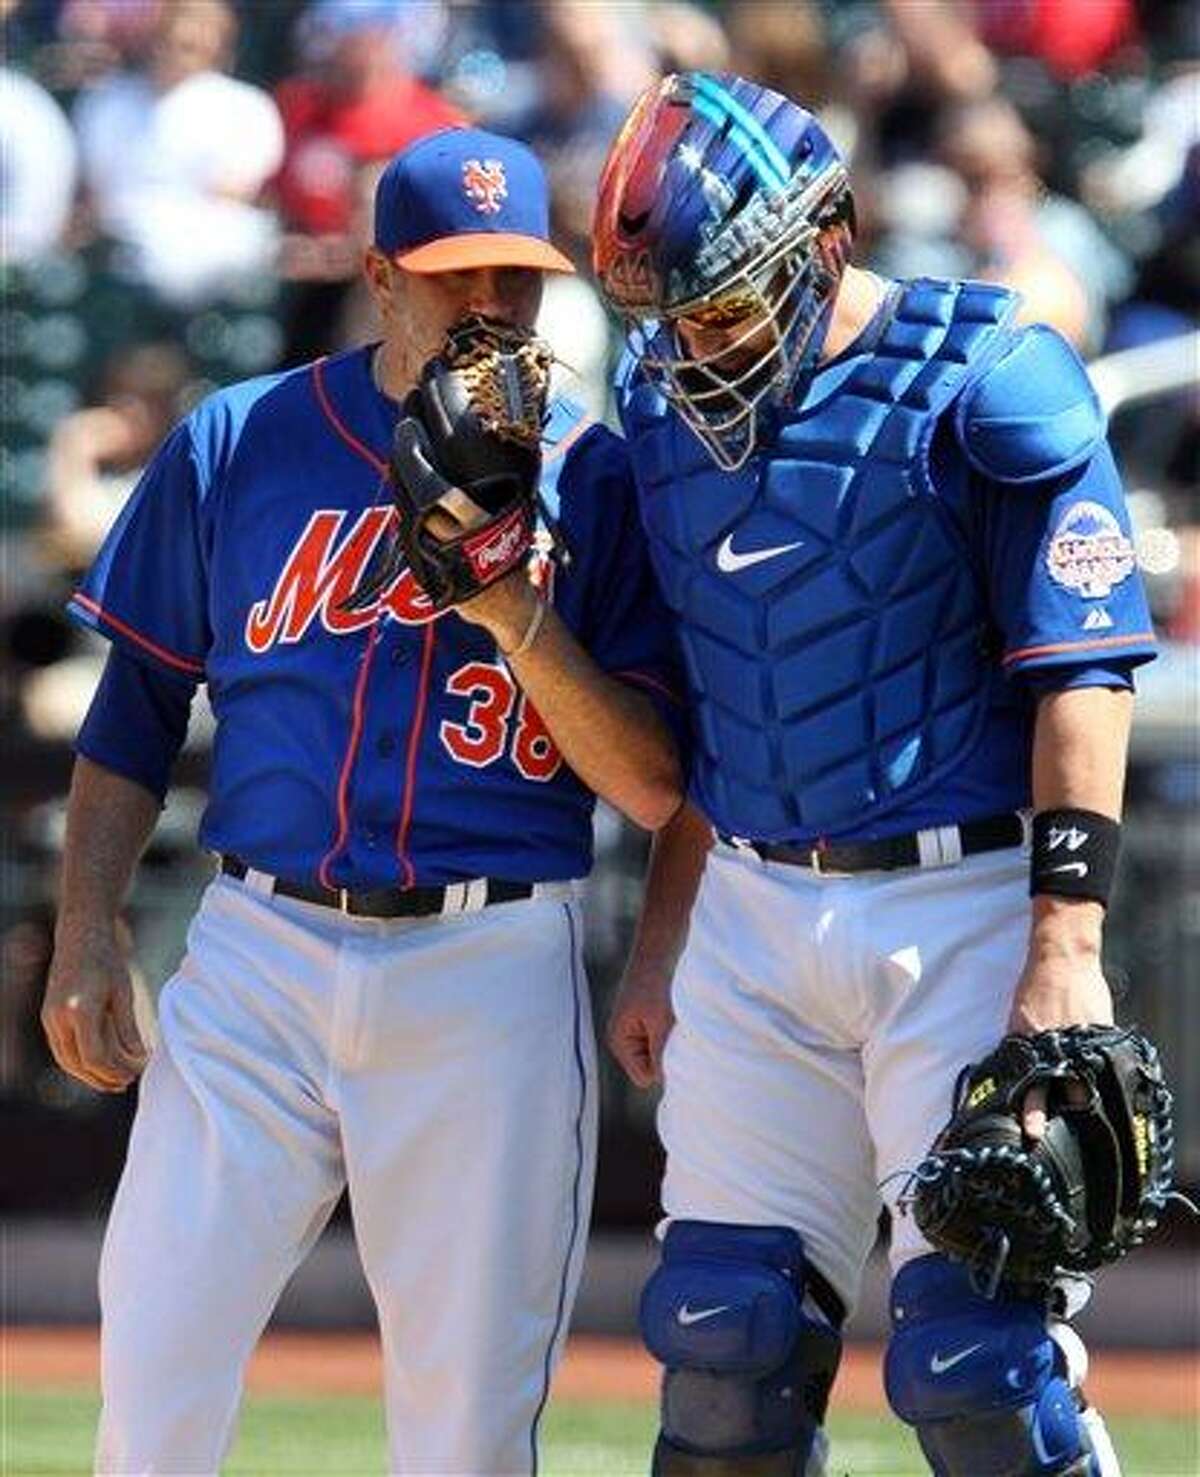 New York Mets starting pitcher Shaun Marcum speaks with catcher John Buck in the third inning of a baseball game against the Philadelphia Phillies in New York on Saturday, April 27, 2013. (AP Photo/Peter Morgan)